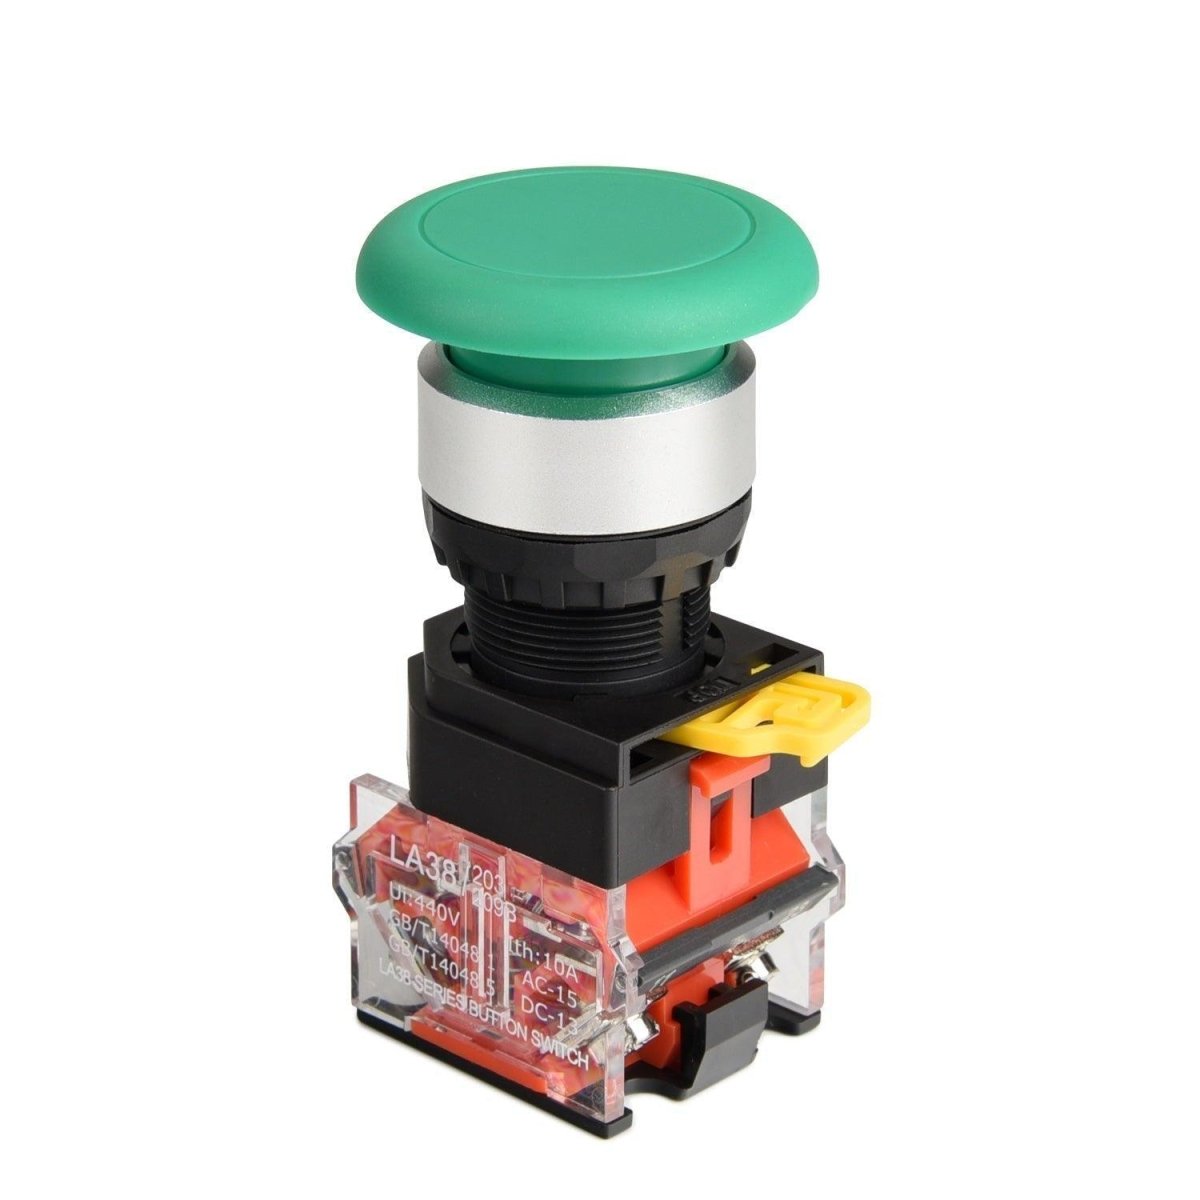 22mm Momentary Mushroom Head Push Button Switch 1NO1NC 7/8'' Mouting Size (Red Green) - Green-